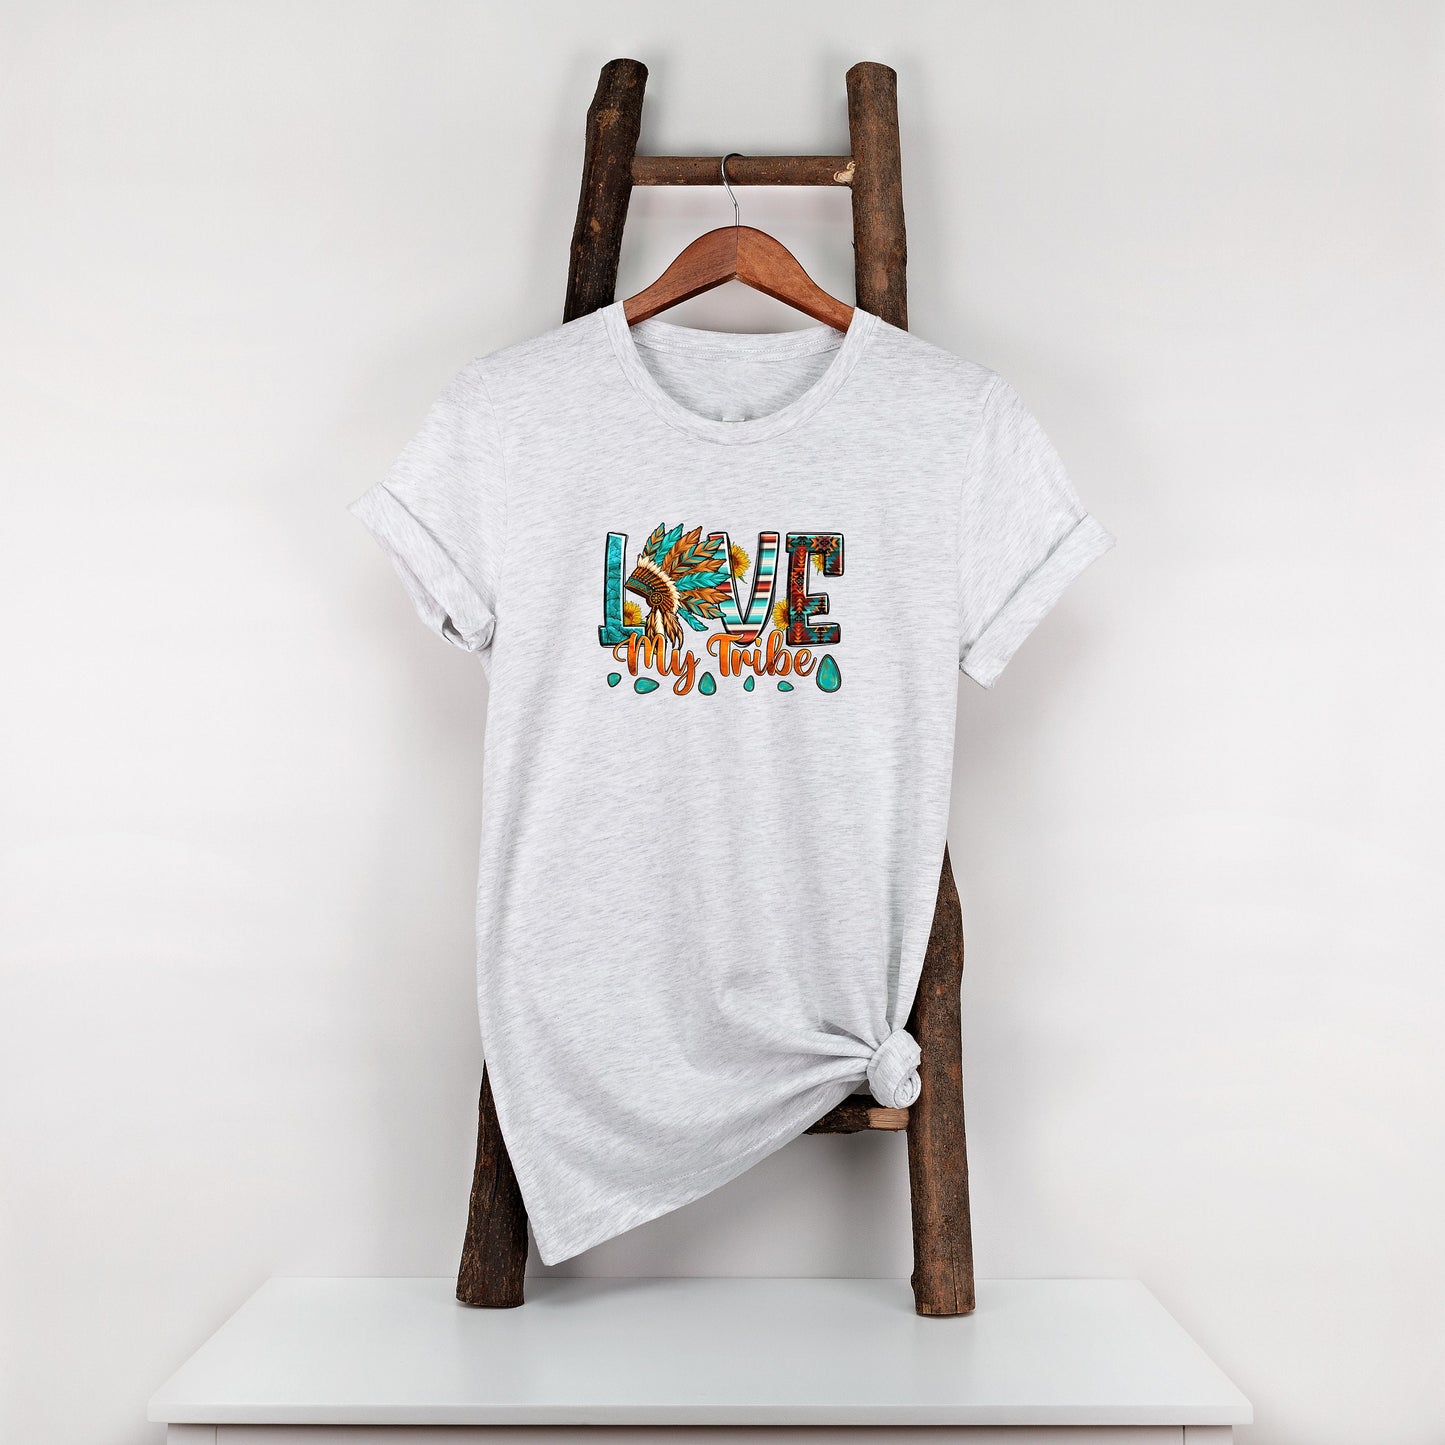 Love My Tribe, Tshirt, Western, Headress, Graphic T's  100% Cotton Black White or Gray